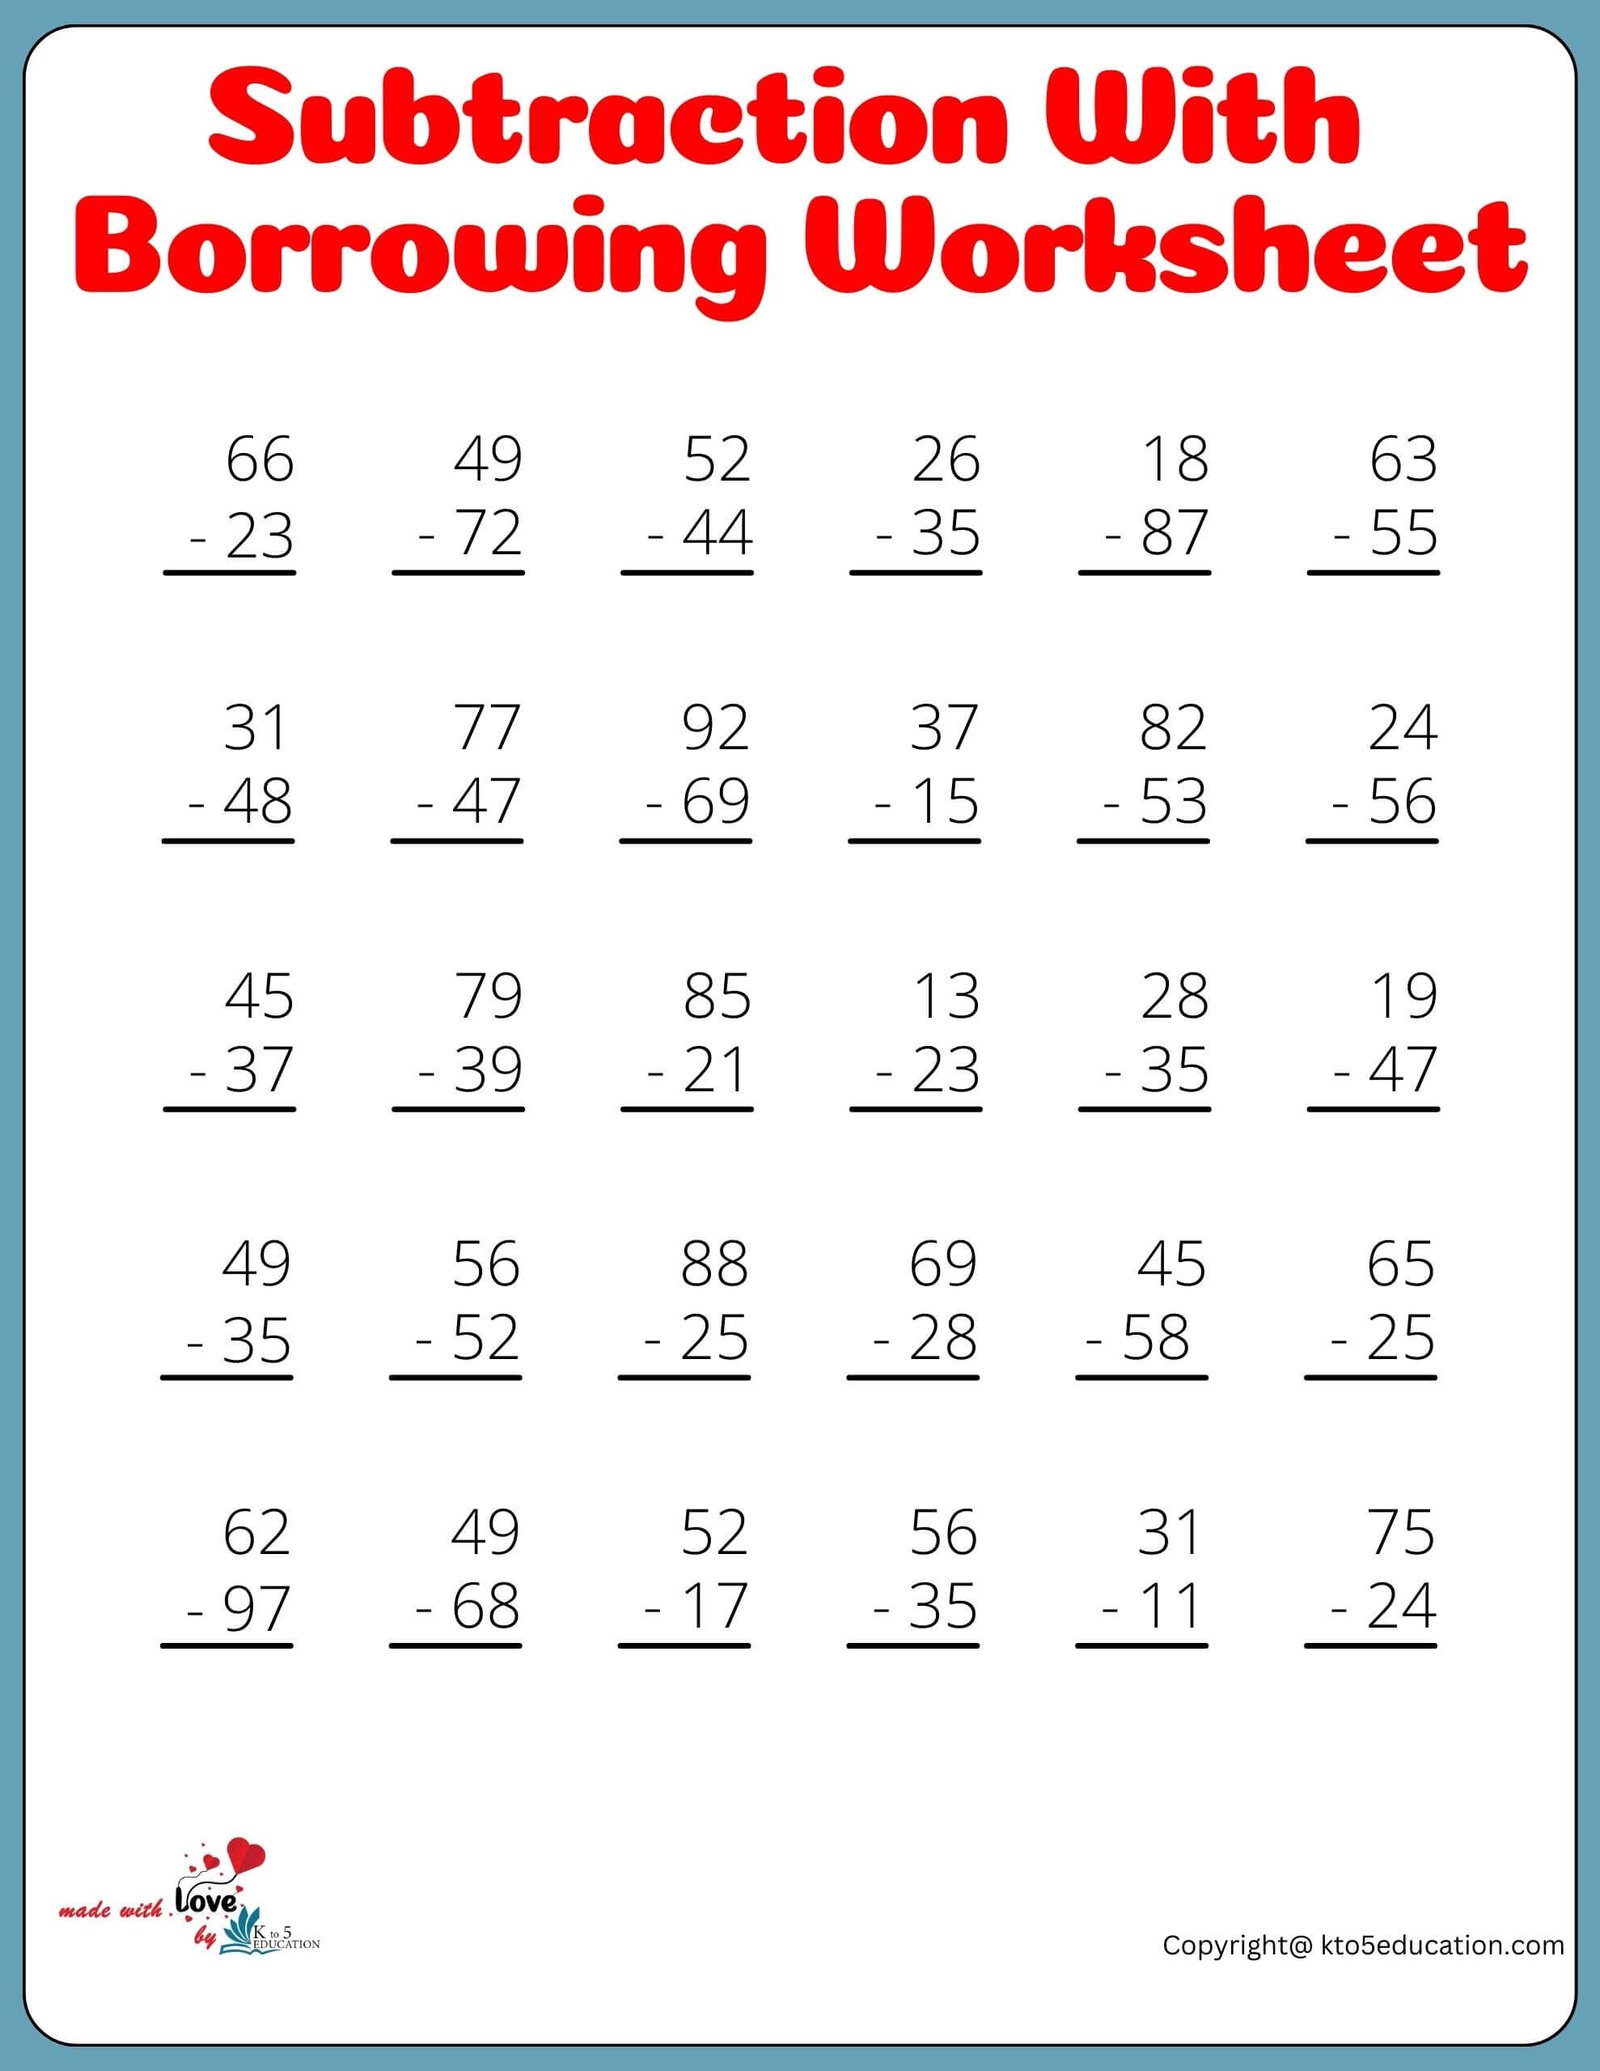 Subtraction With Borrowing Worksheet For 4th Grade